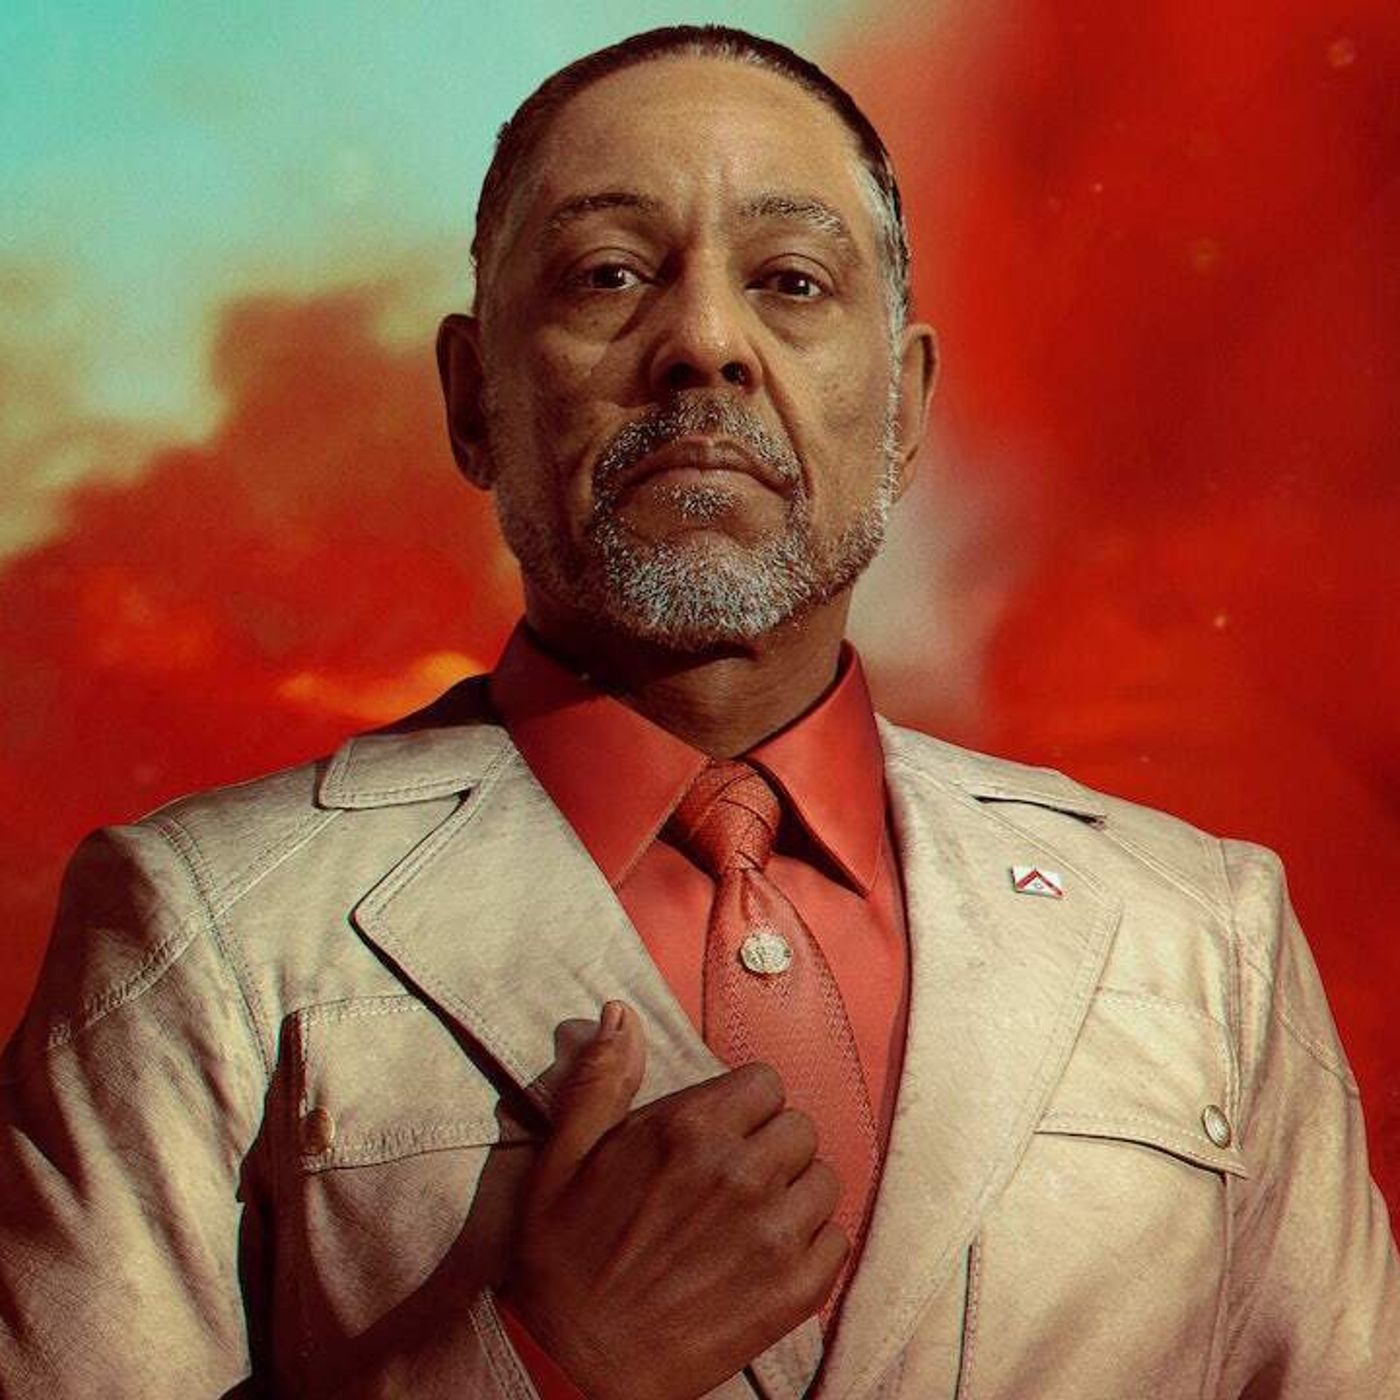 S16 Ep1167: Giancarlo Esposito Interview about Far Cry 6